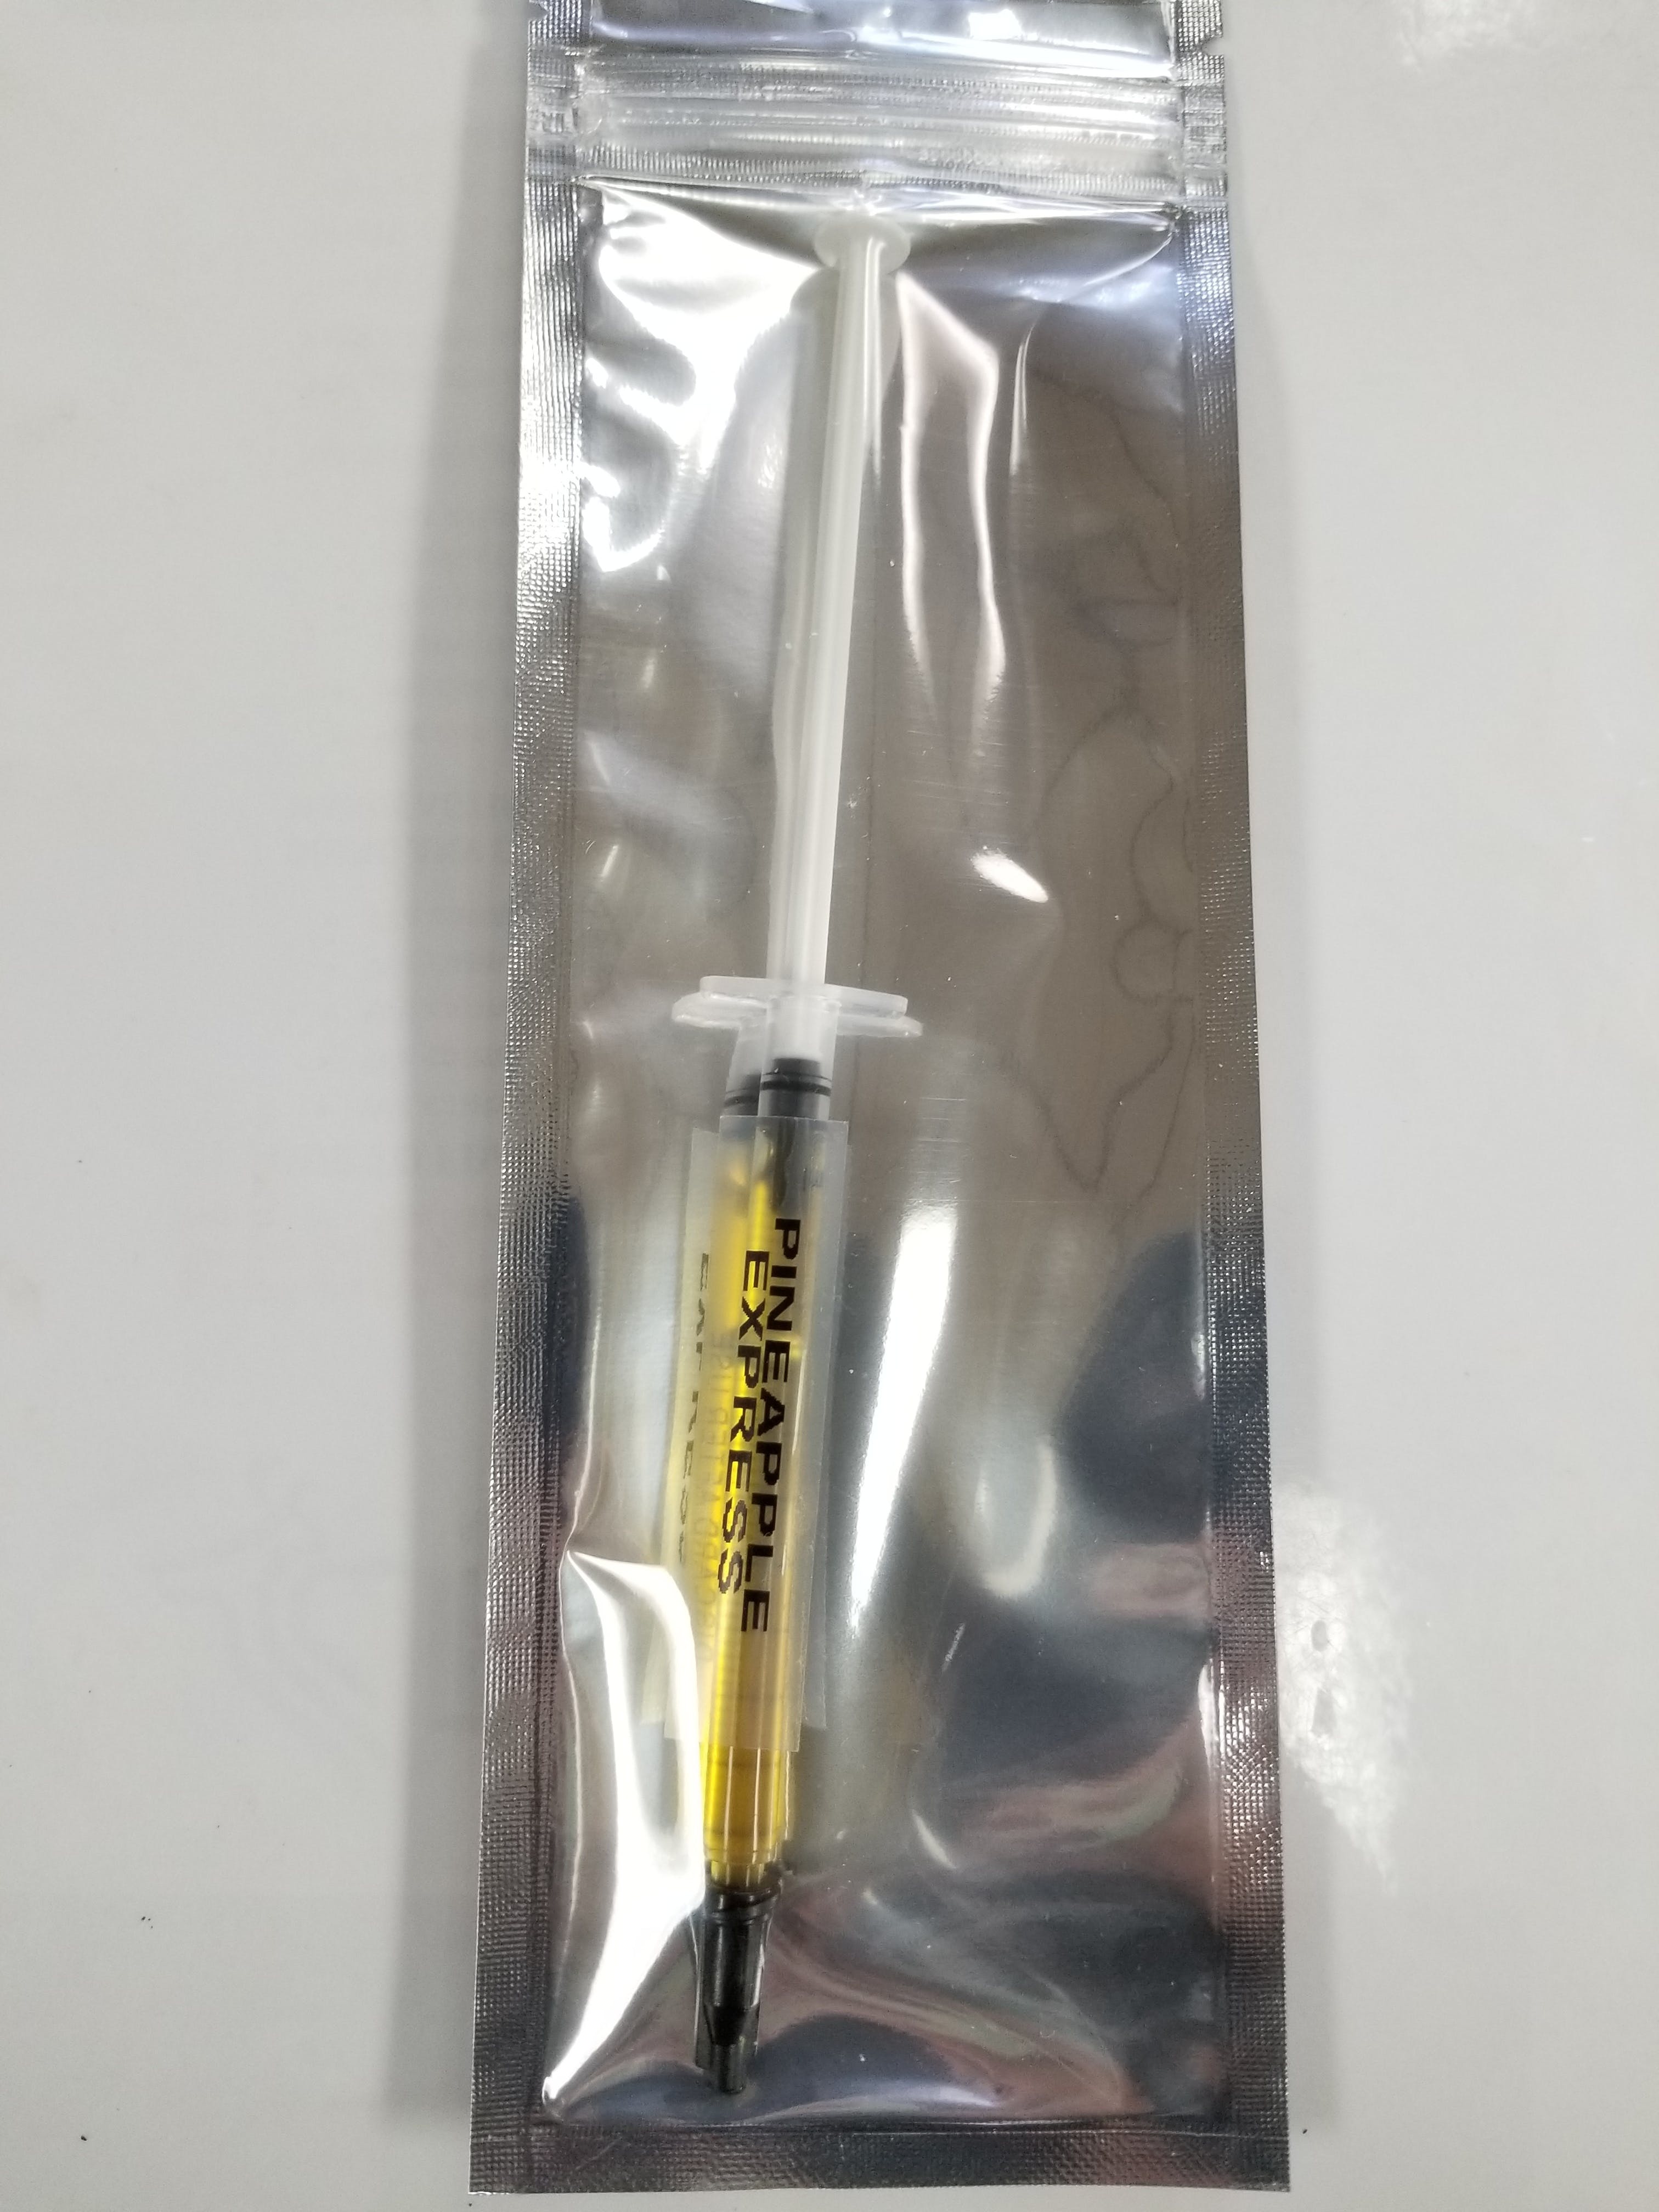 concentrate-pot-county-extracts-distillate-syringe-sour-diesel